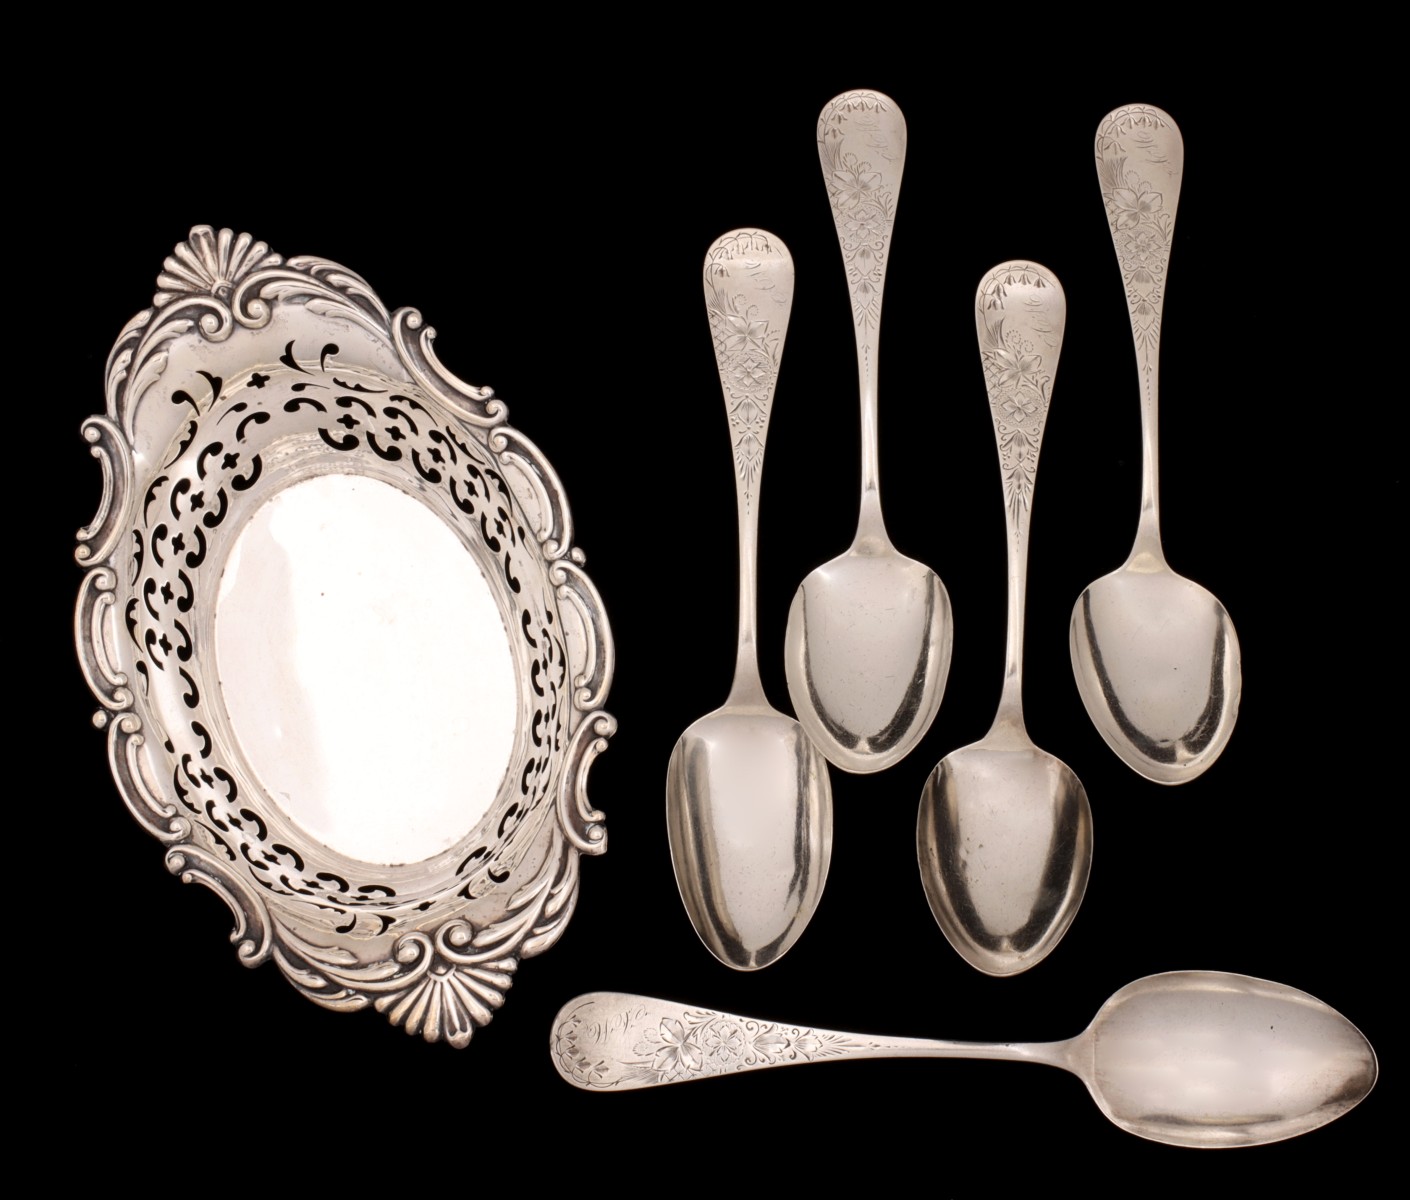 GORHAM AND F.W. WHITING STERLING SILVER SERVING PIECES